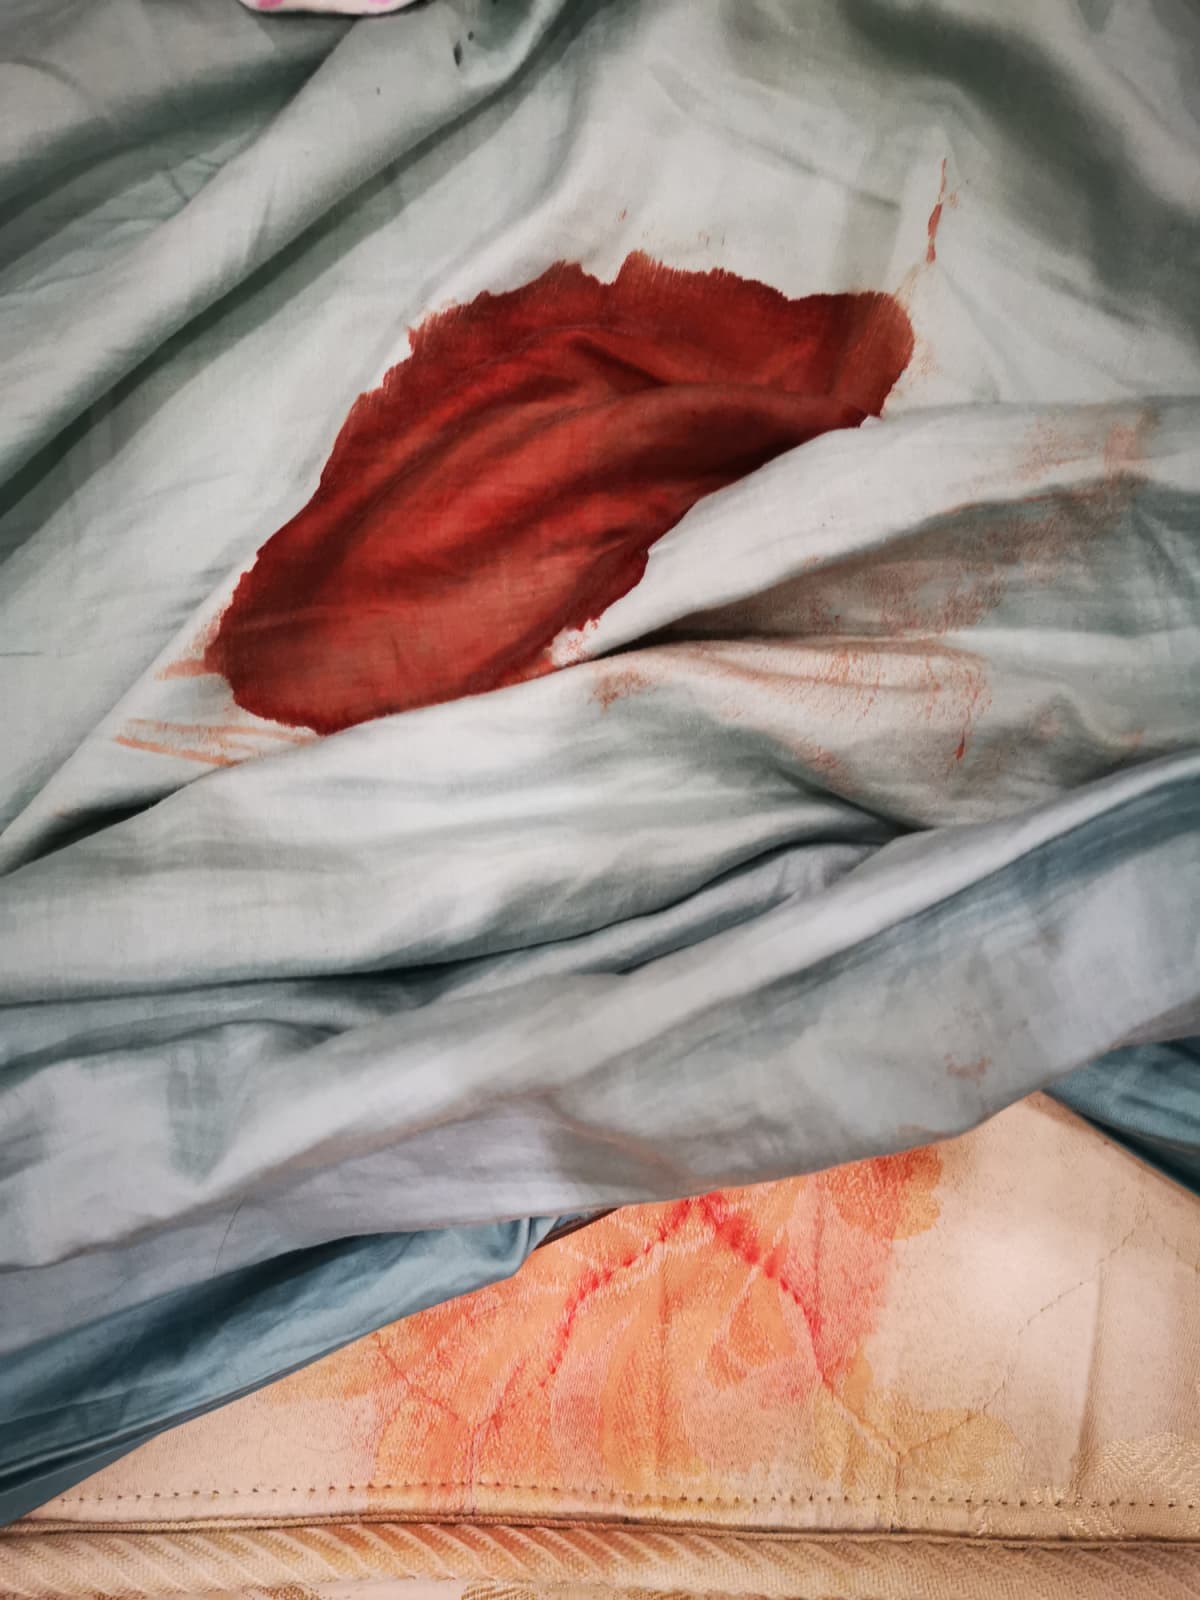 Blood stains on sheet and mattress